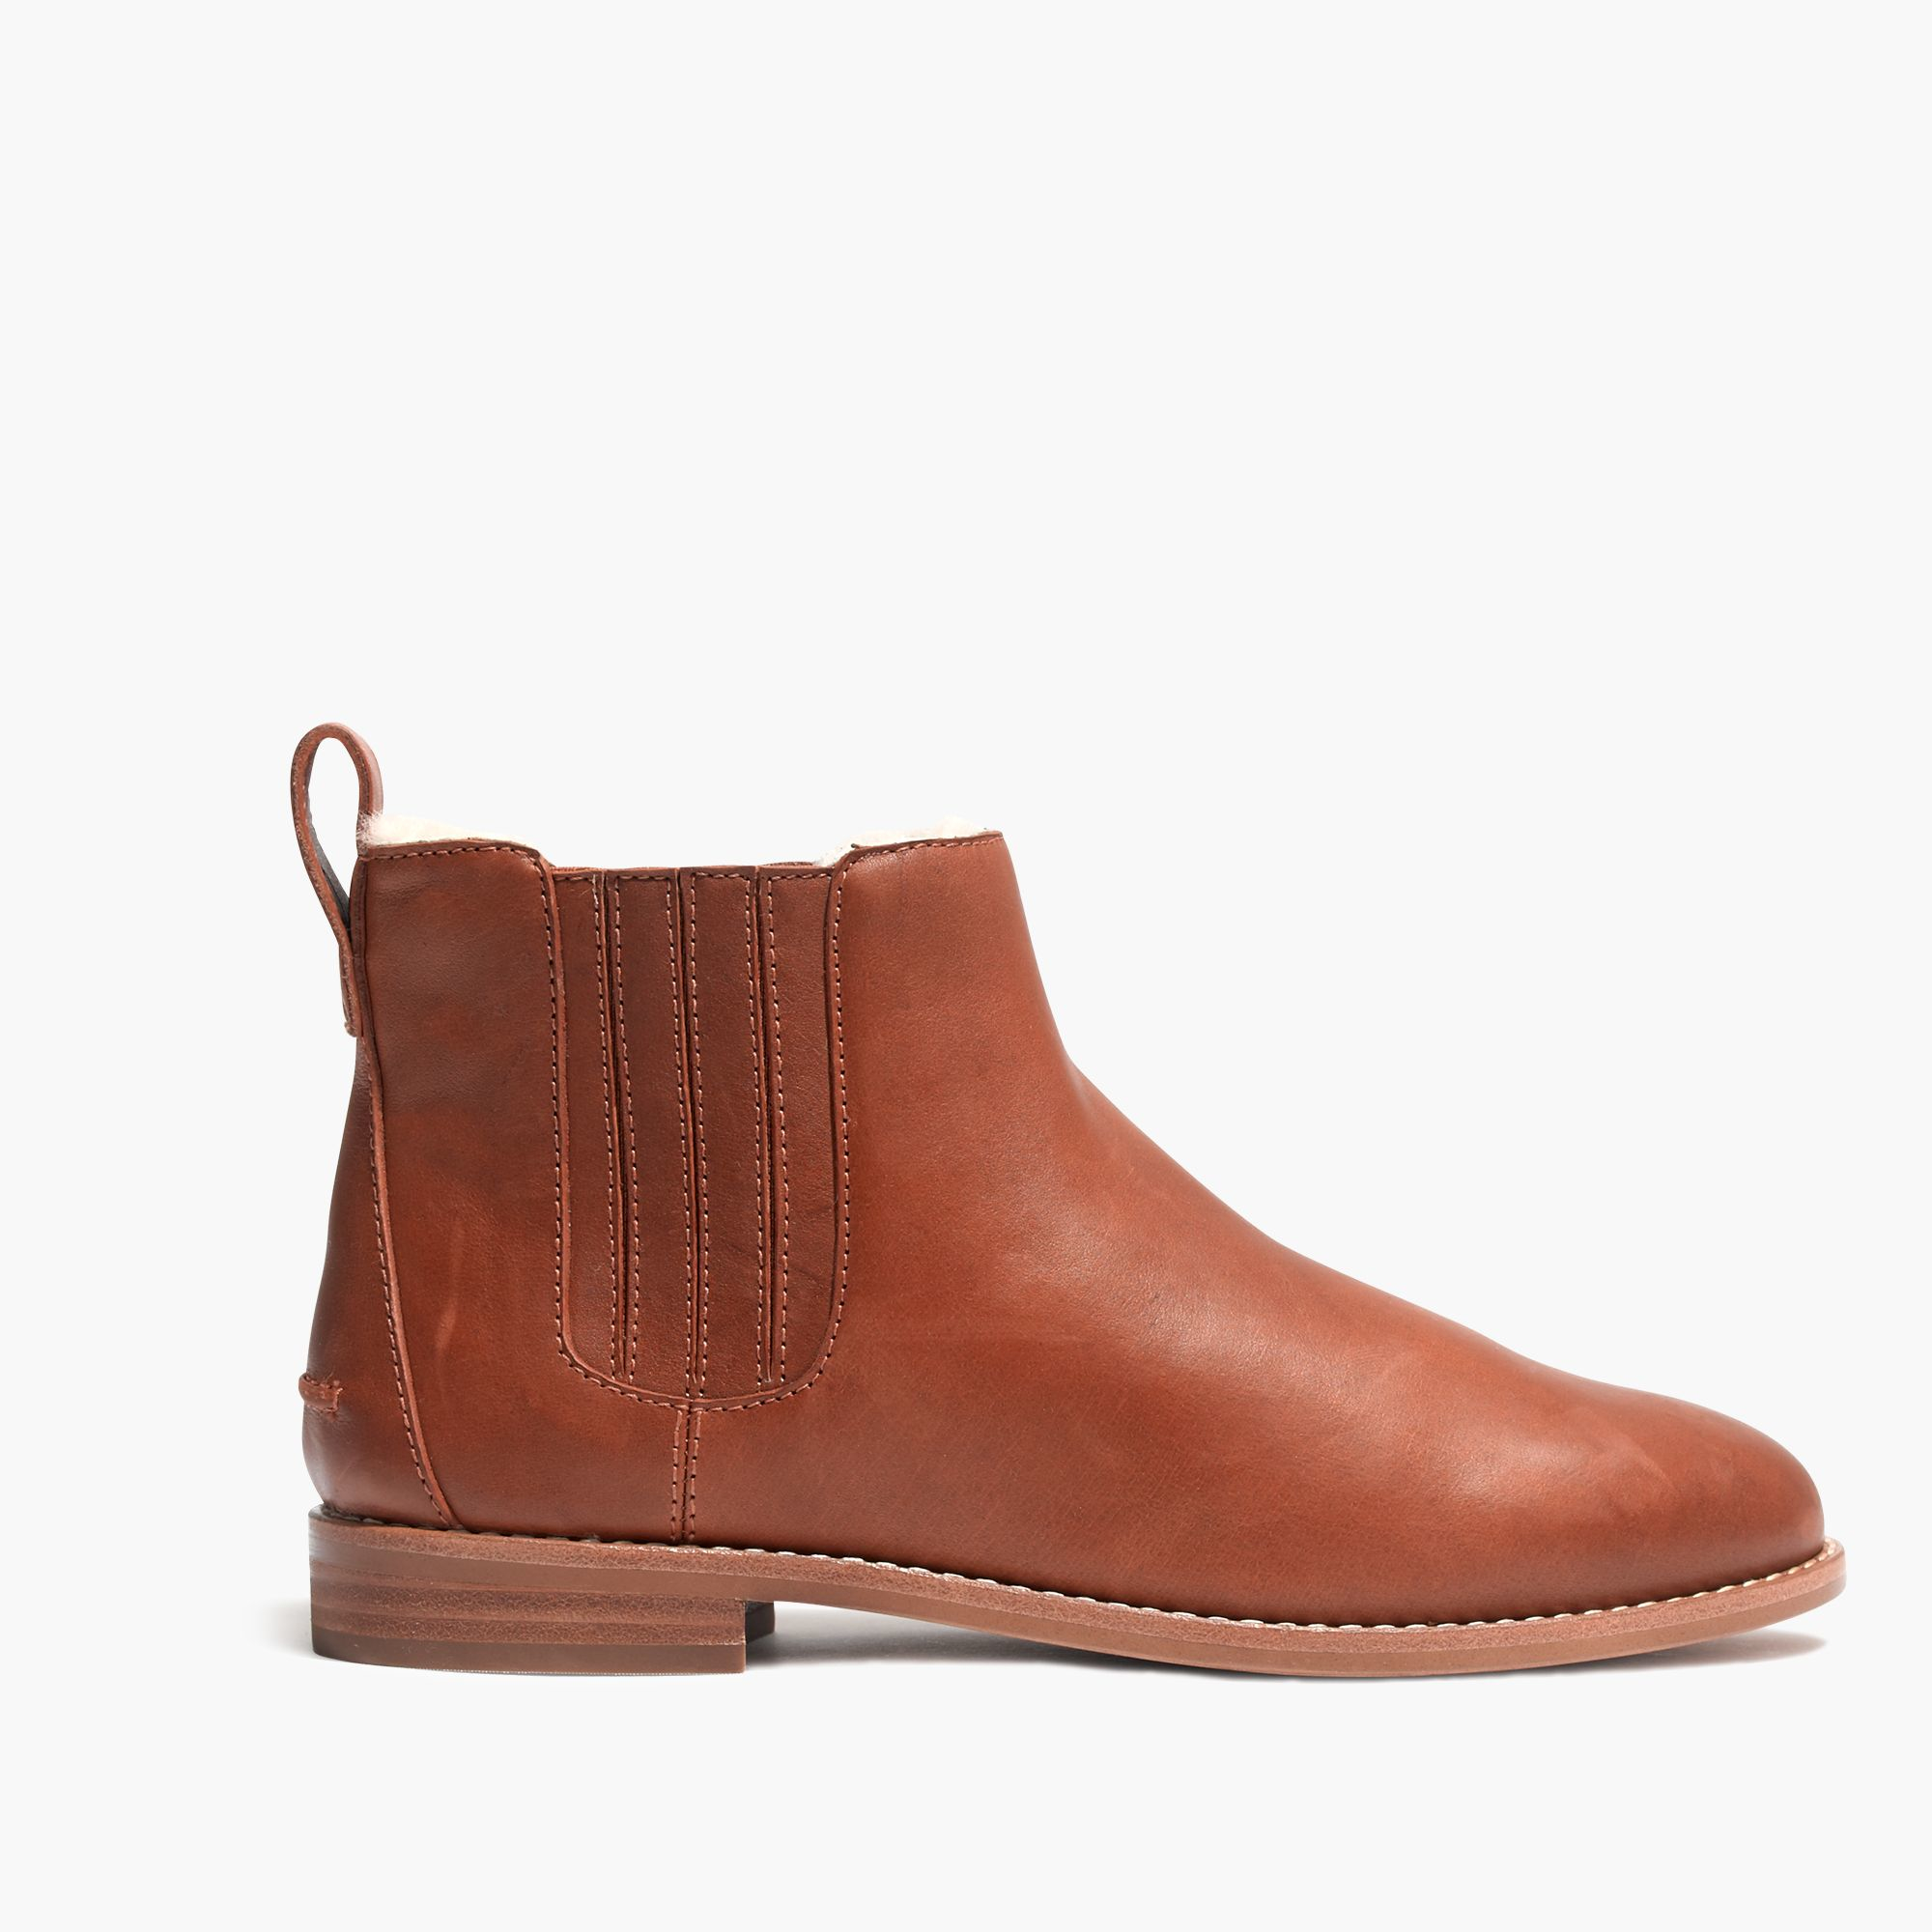 Lyst - Madewell The Chelsea Boot In Shearling in Brown